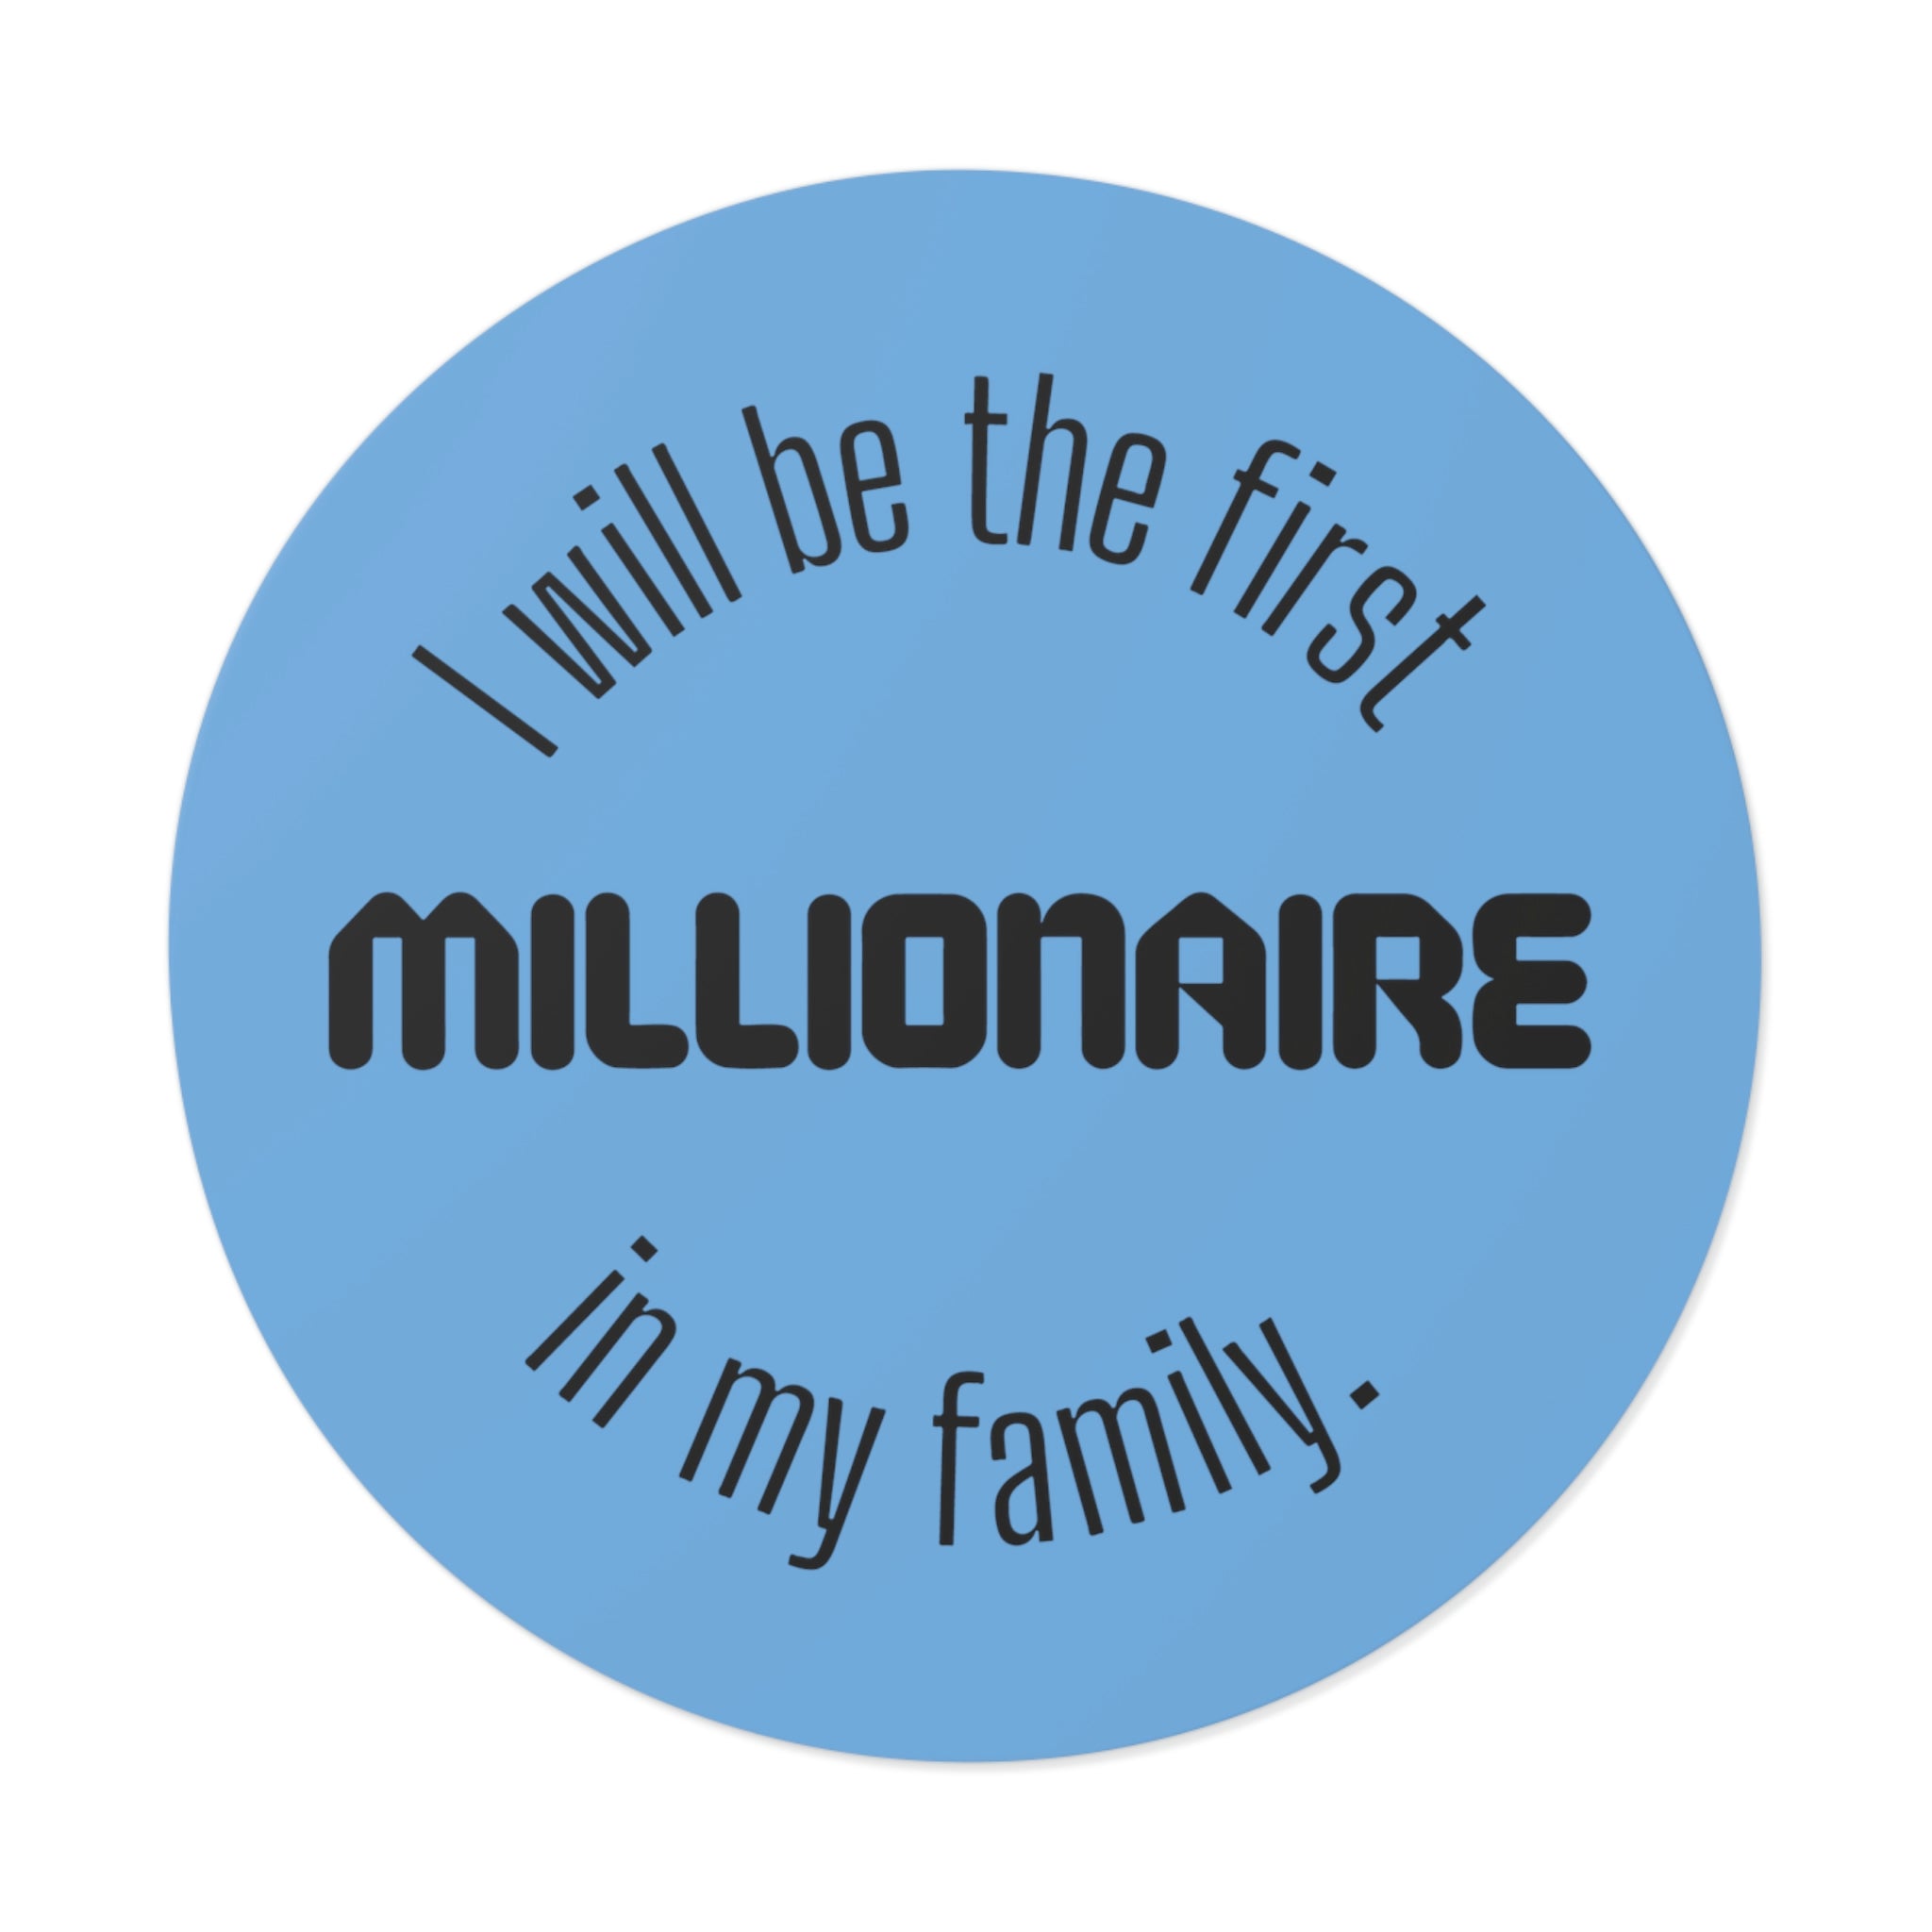 One day i will be a millionaire quotes | Shop Stickers #size_4x4-inches